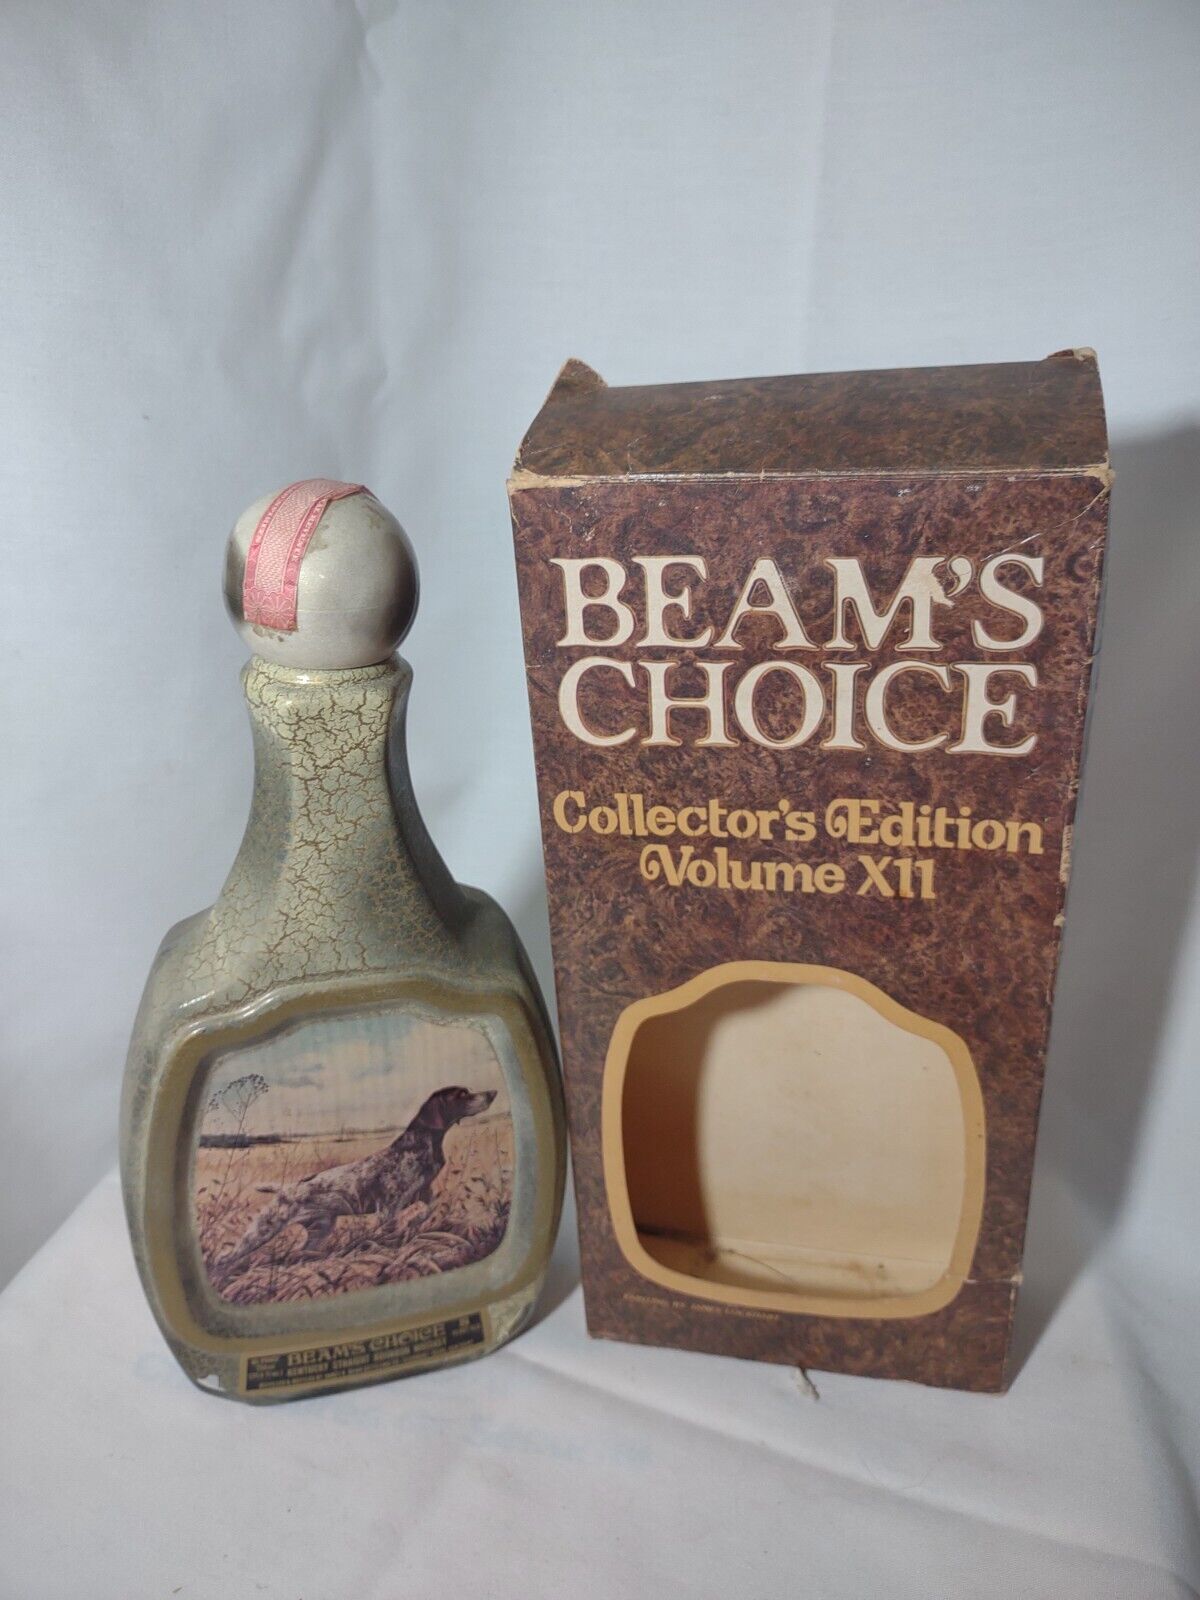 VTG JIM BEAM\'S COLLECTOR\'S EDITION VOLUME XII BEAM\'S CHOICE EMPTY